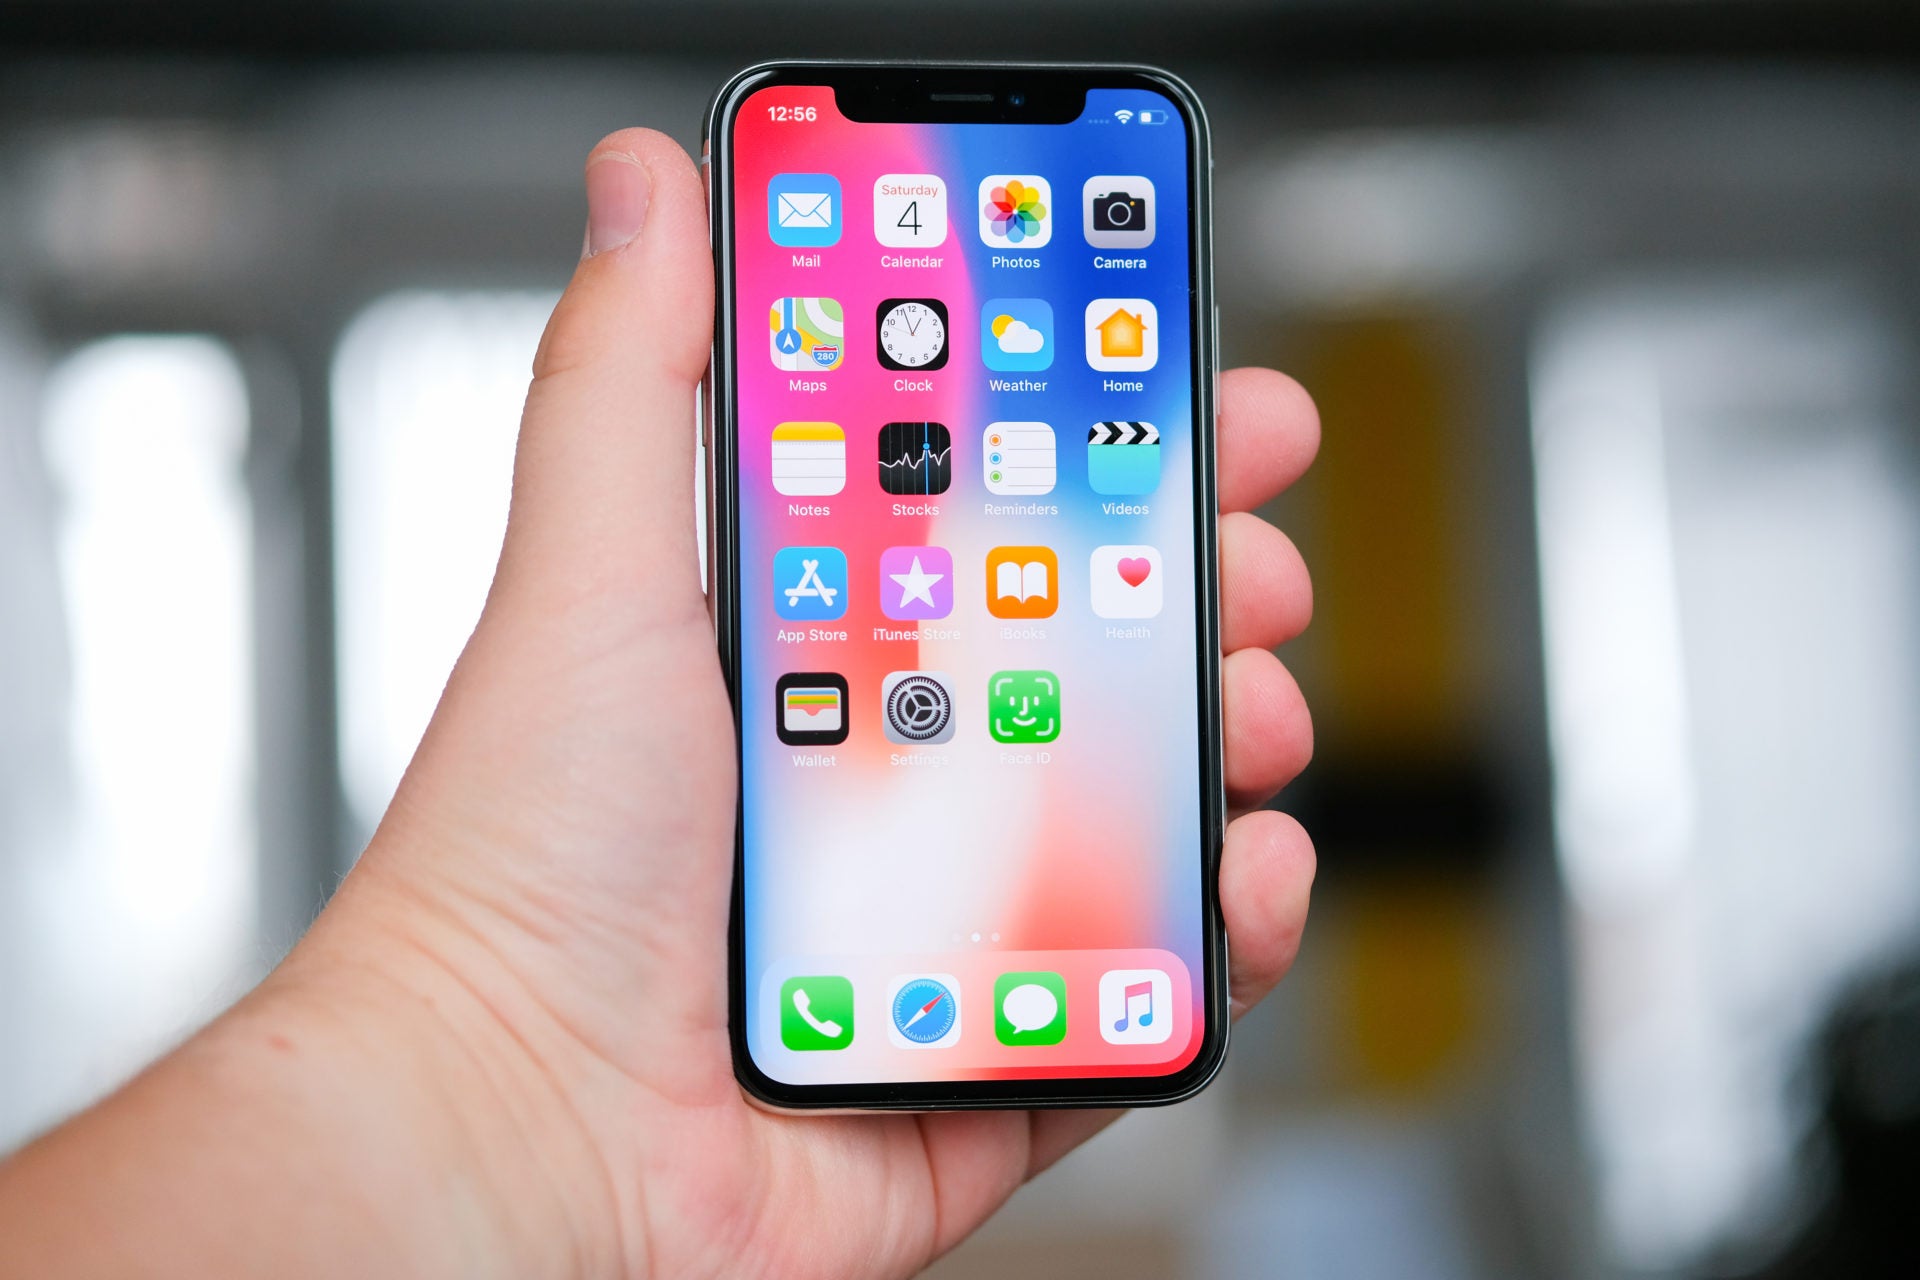 Apple predictions for 2019: What new iPhone features will next year bring?